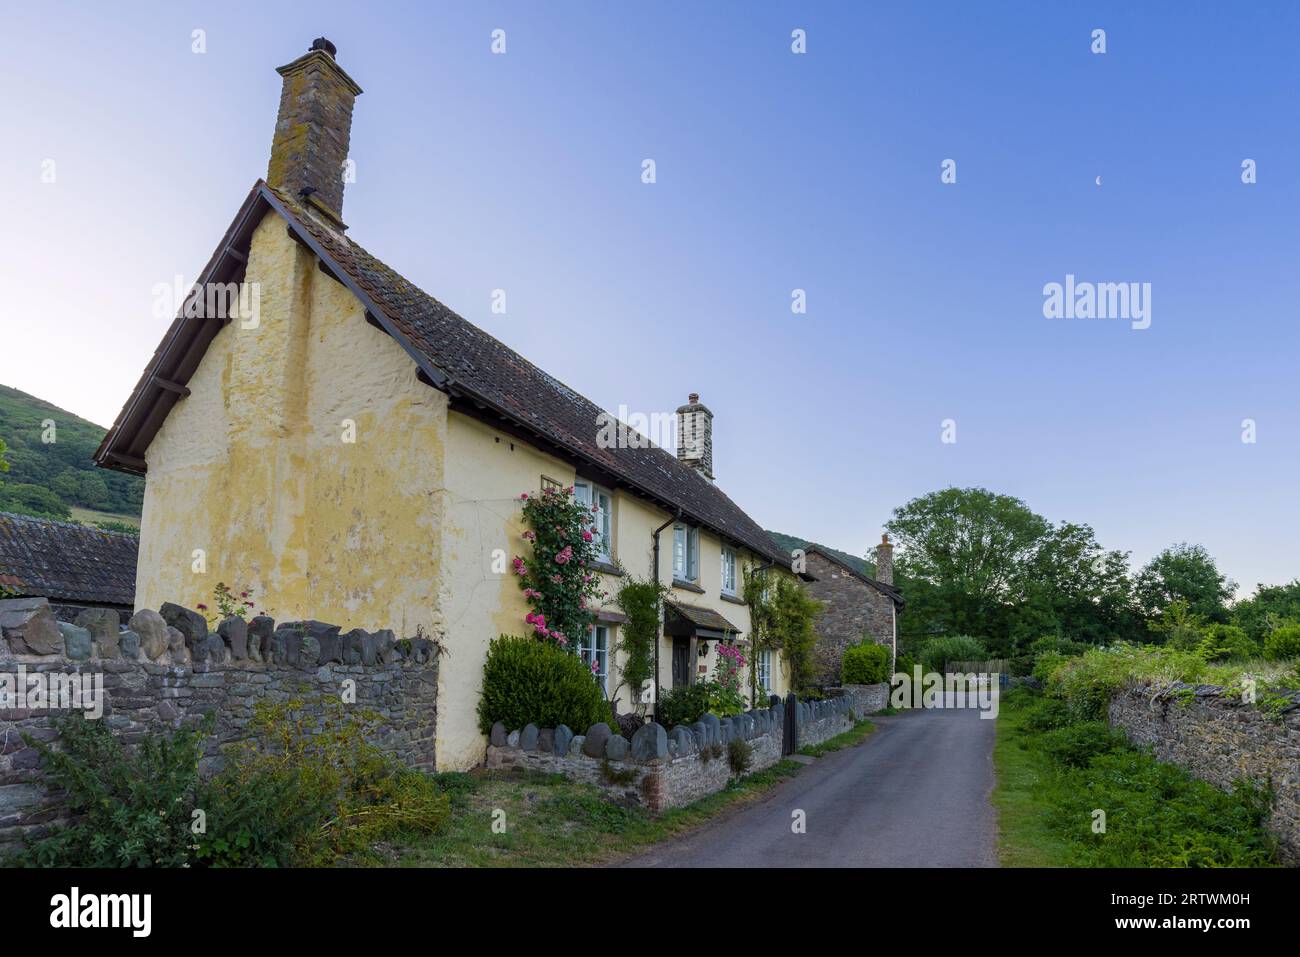 Cottages in the hamlet of Bossington in the Exmoor National Park, Somerset, England. Stock Photo